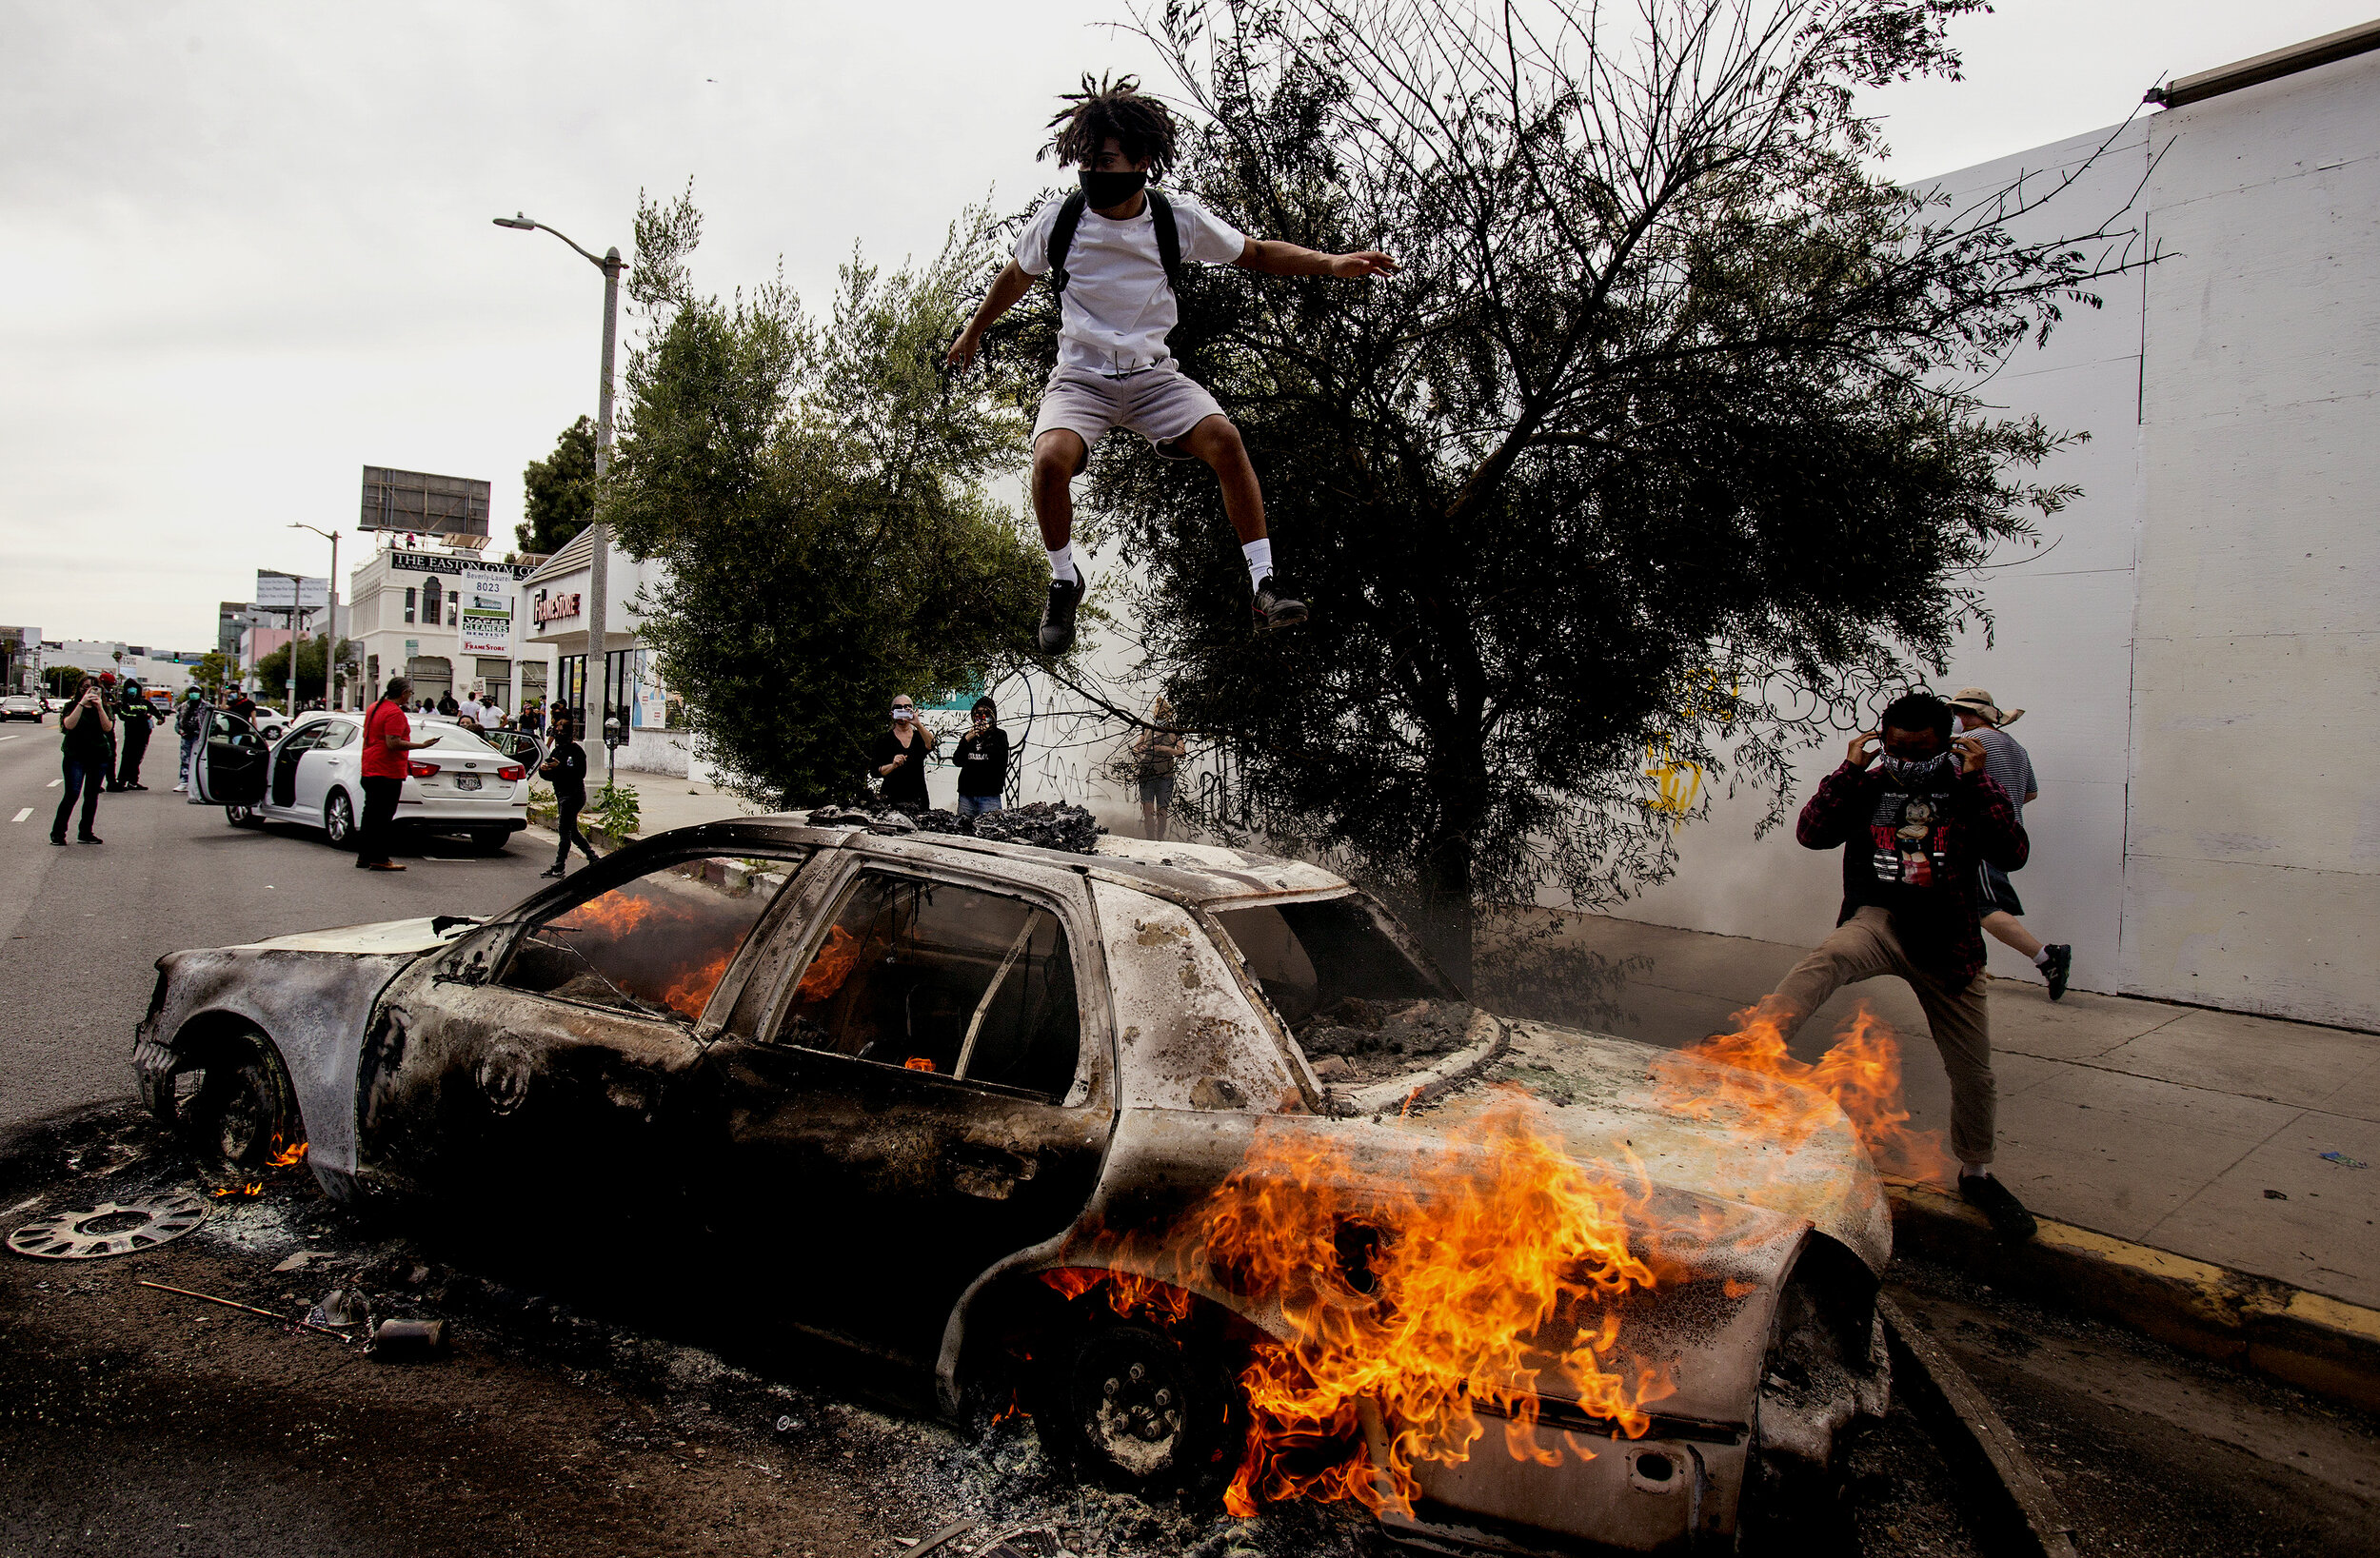  A man jumps on a burning police vehicle in Los Angeles, Saturday, May 30, 2020, during a protest over the death of George Floyd. Floyd died in Minneapolis police custody on Memorial Day.The 2020 Black Lives Matter protests across the nation were spa